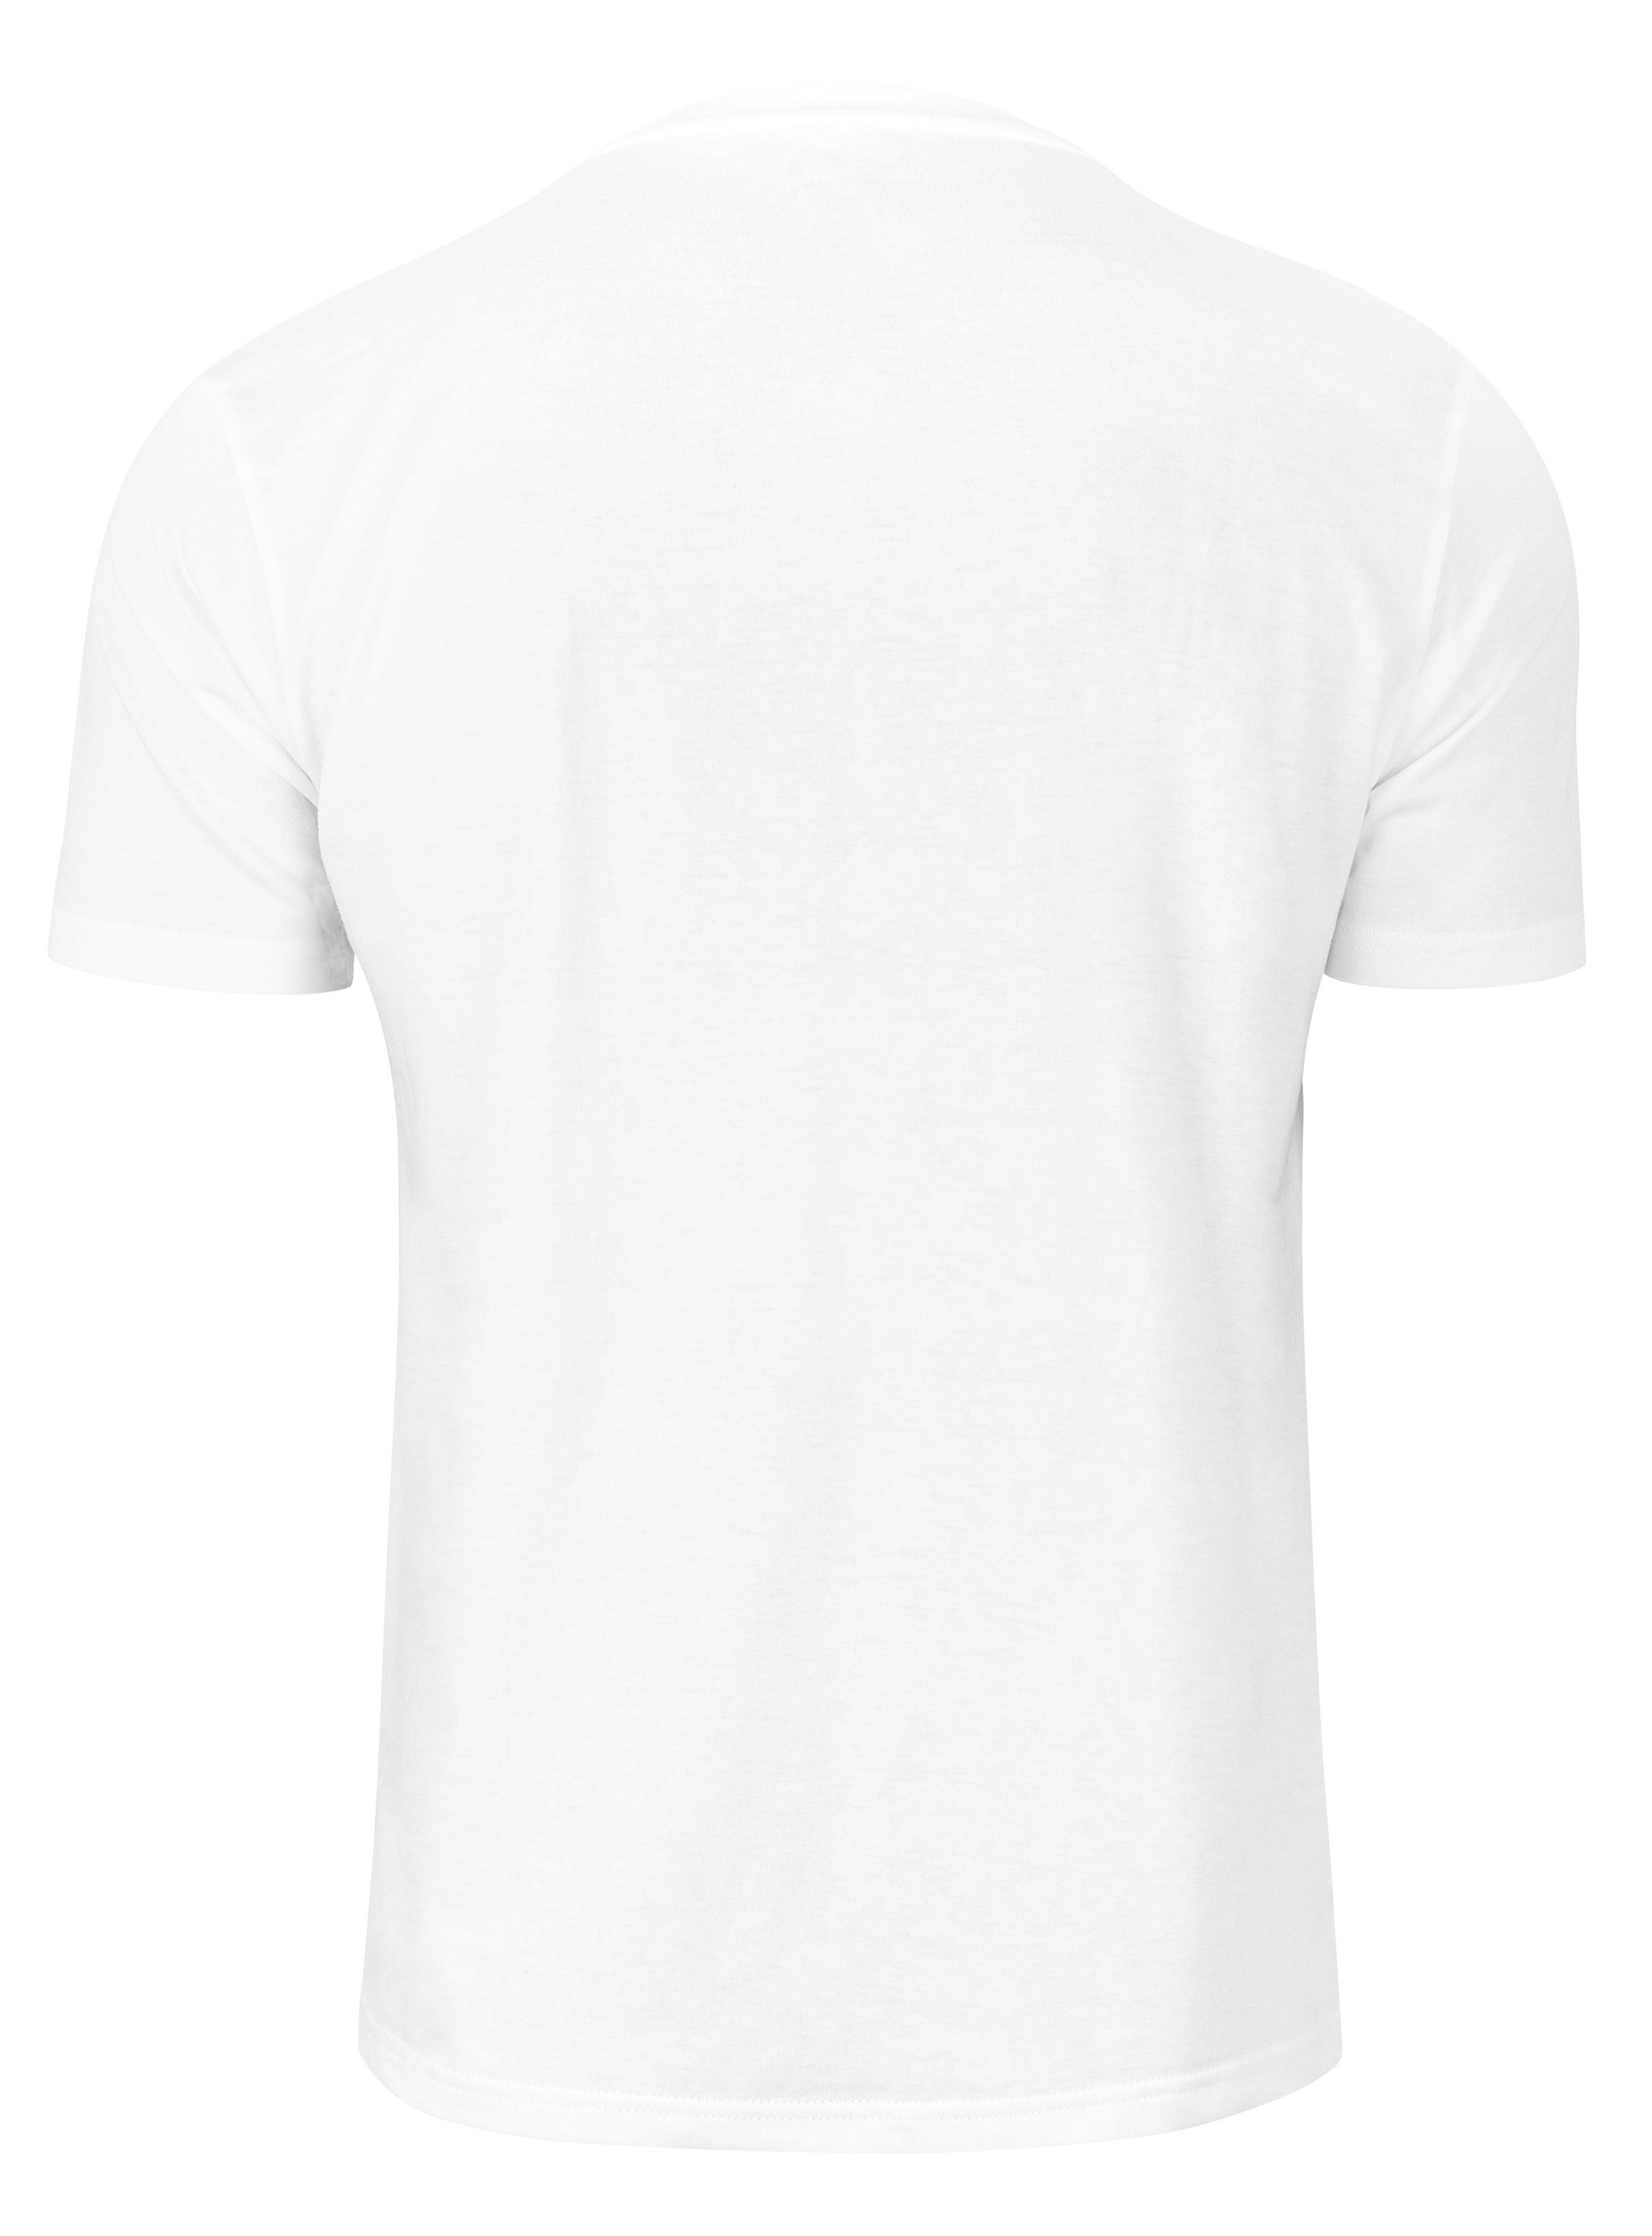 Cotton Prime® T-Shirt "THE weiss WALKING DAD"